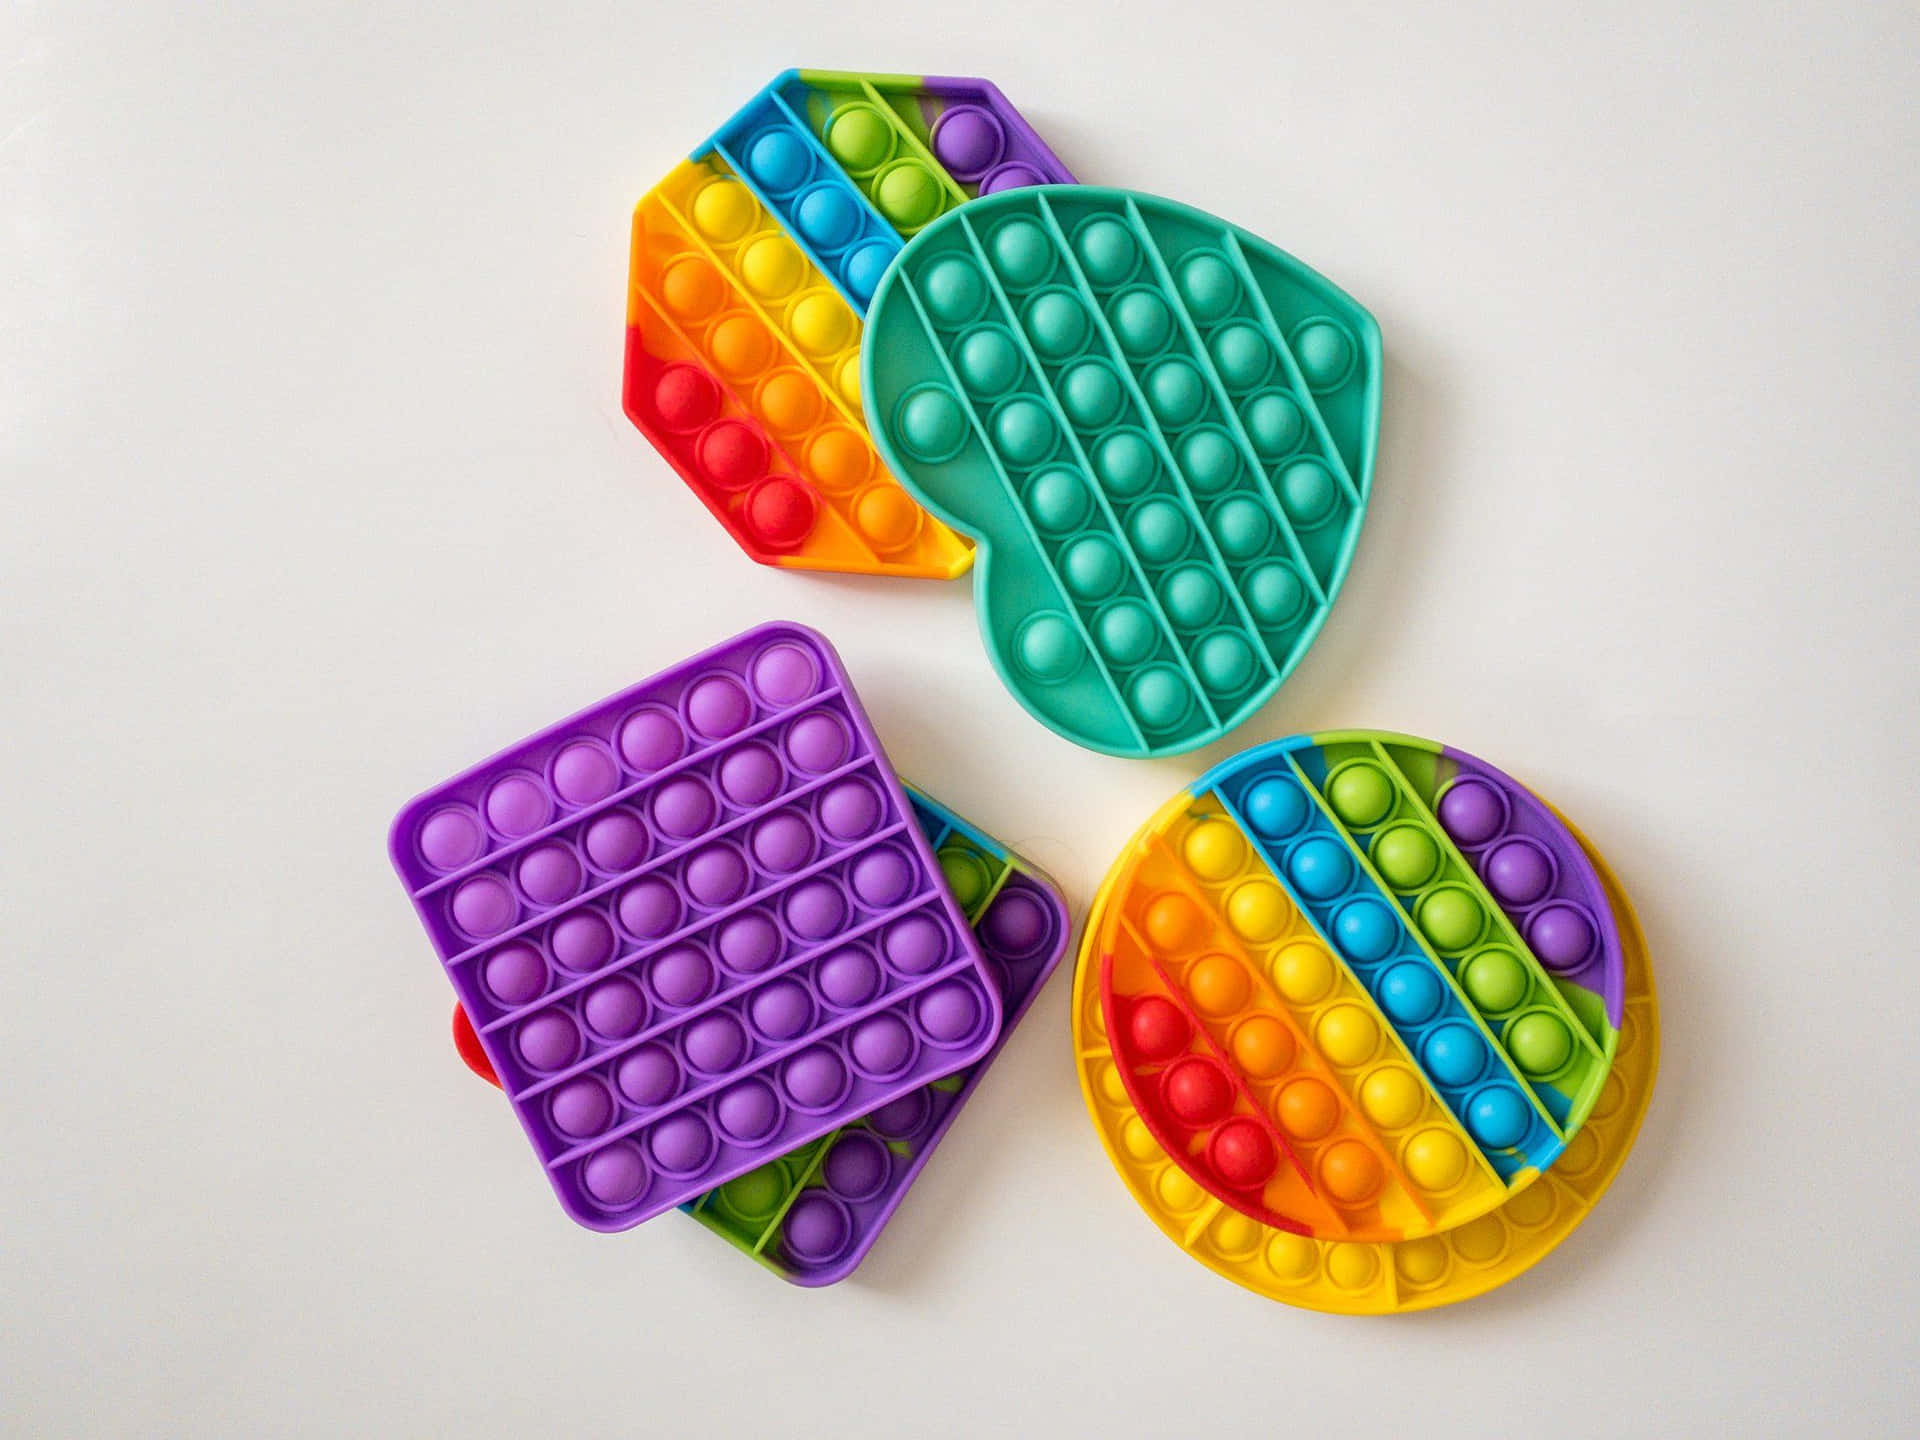 A Set Of Colorful Plastic Plates With Different Shapes